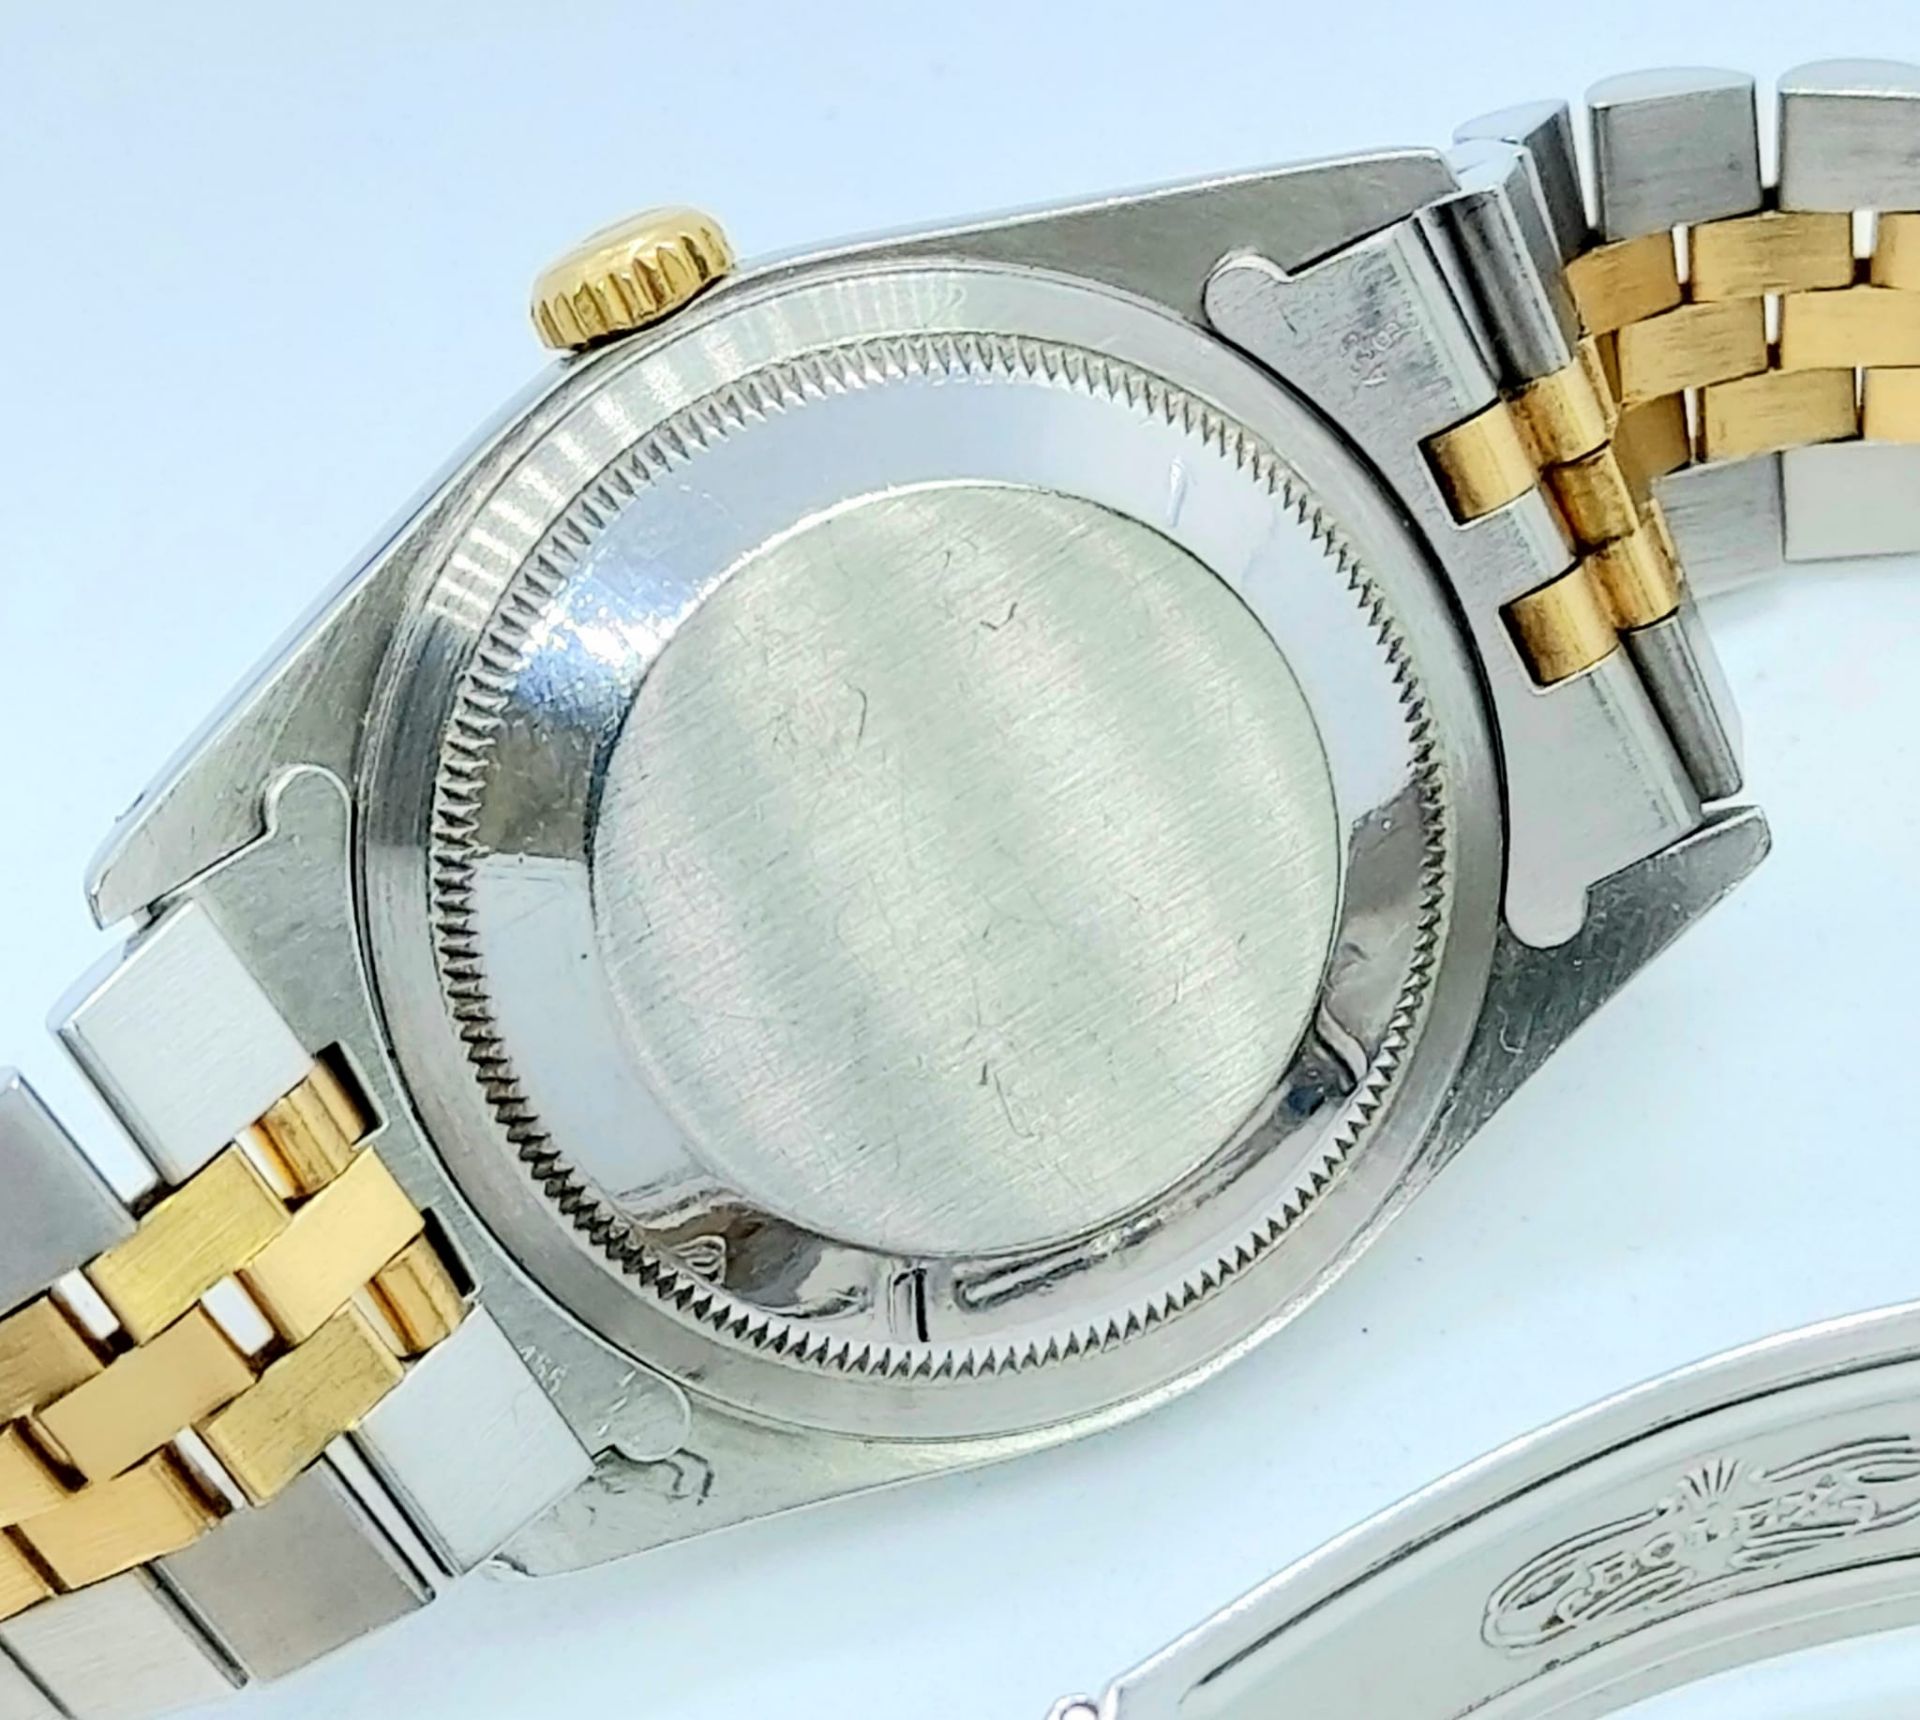 A Bi-Metal Rolex Oyster Perpetual Datejust Gents Diamond Watch. Bi-metal strap and case - 36mm. - Image 4 of 7